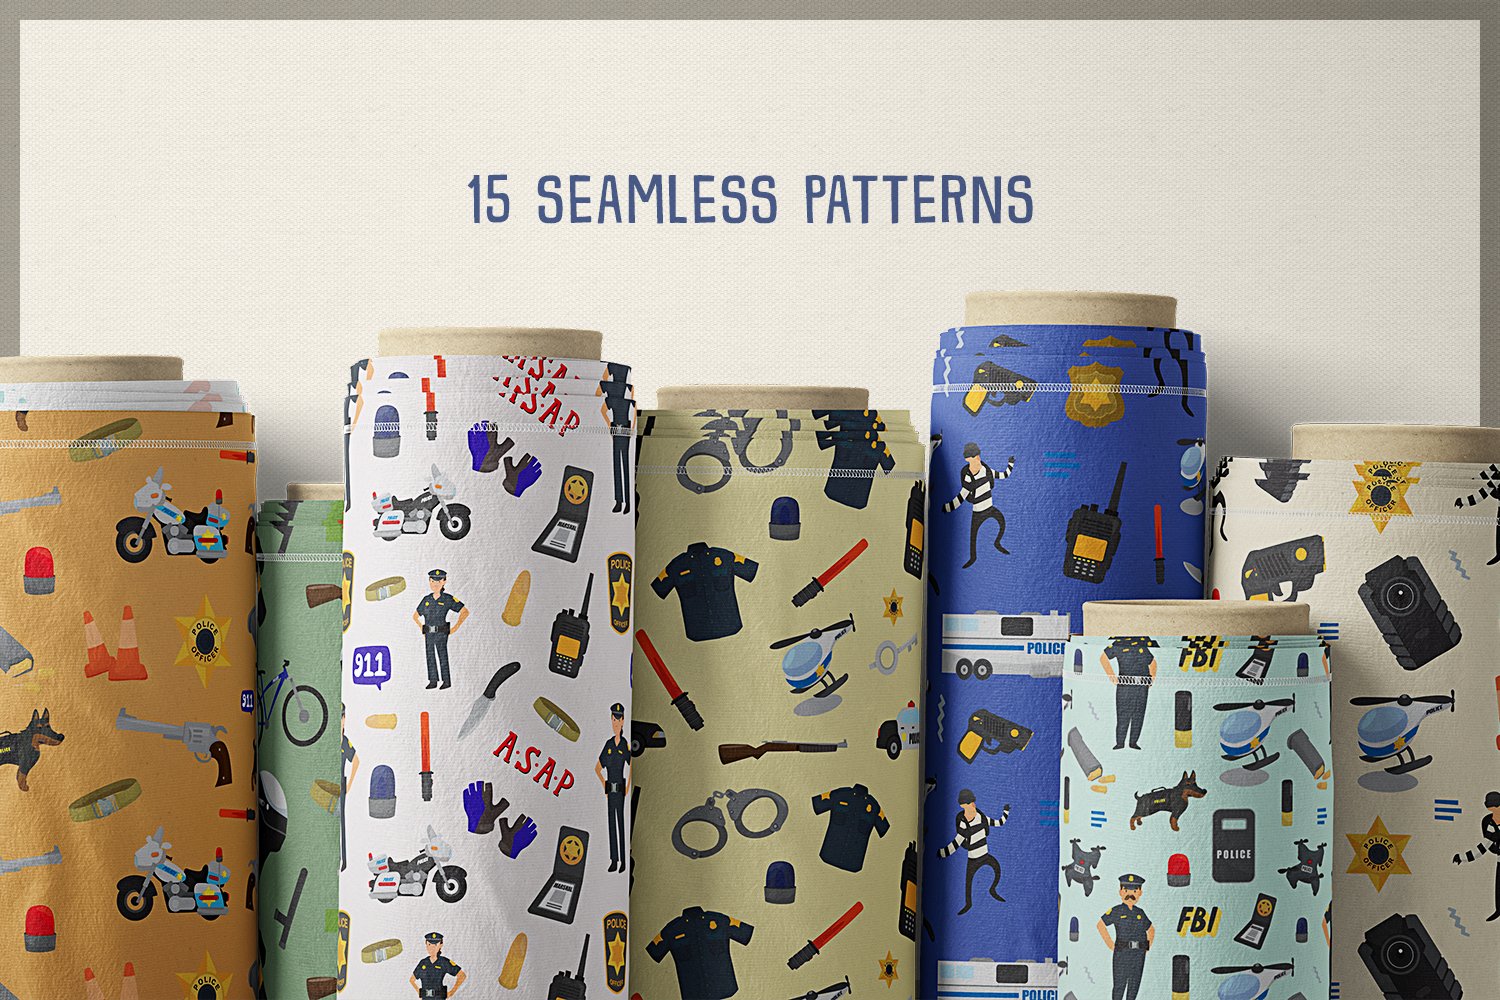 The blue lettering "15 seamless patterns" on a grey background and 7 different rolls with images of police elements.